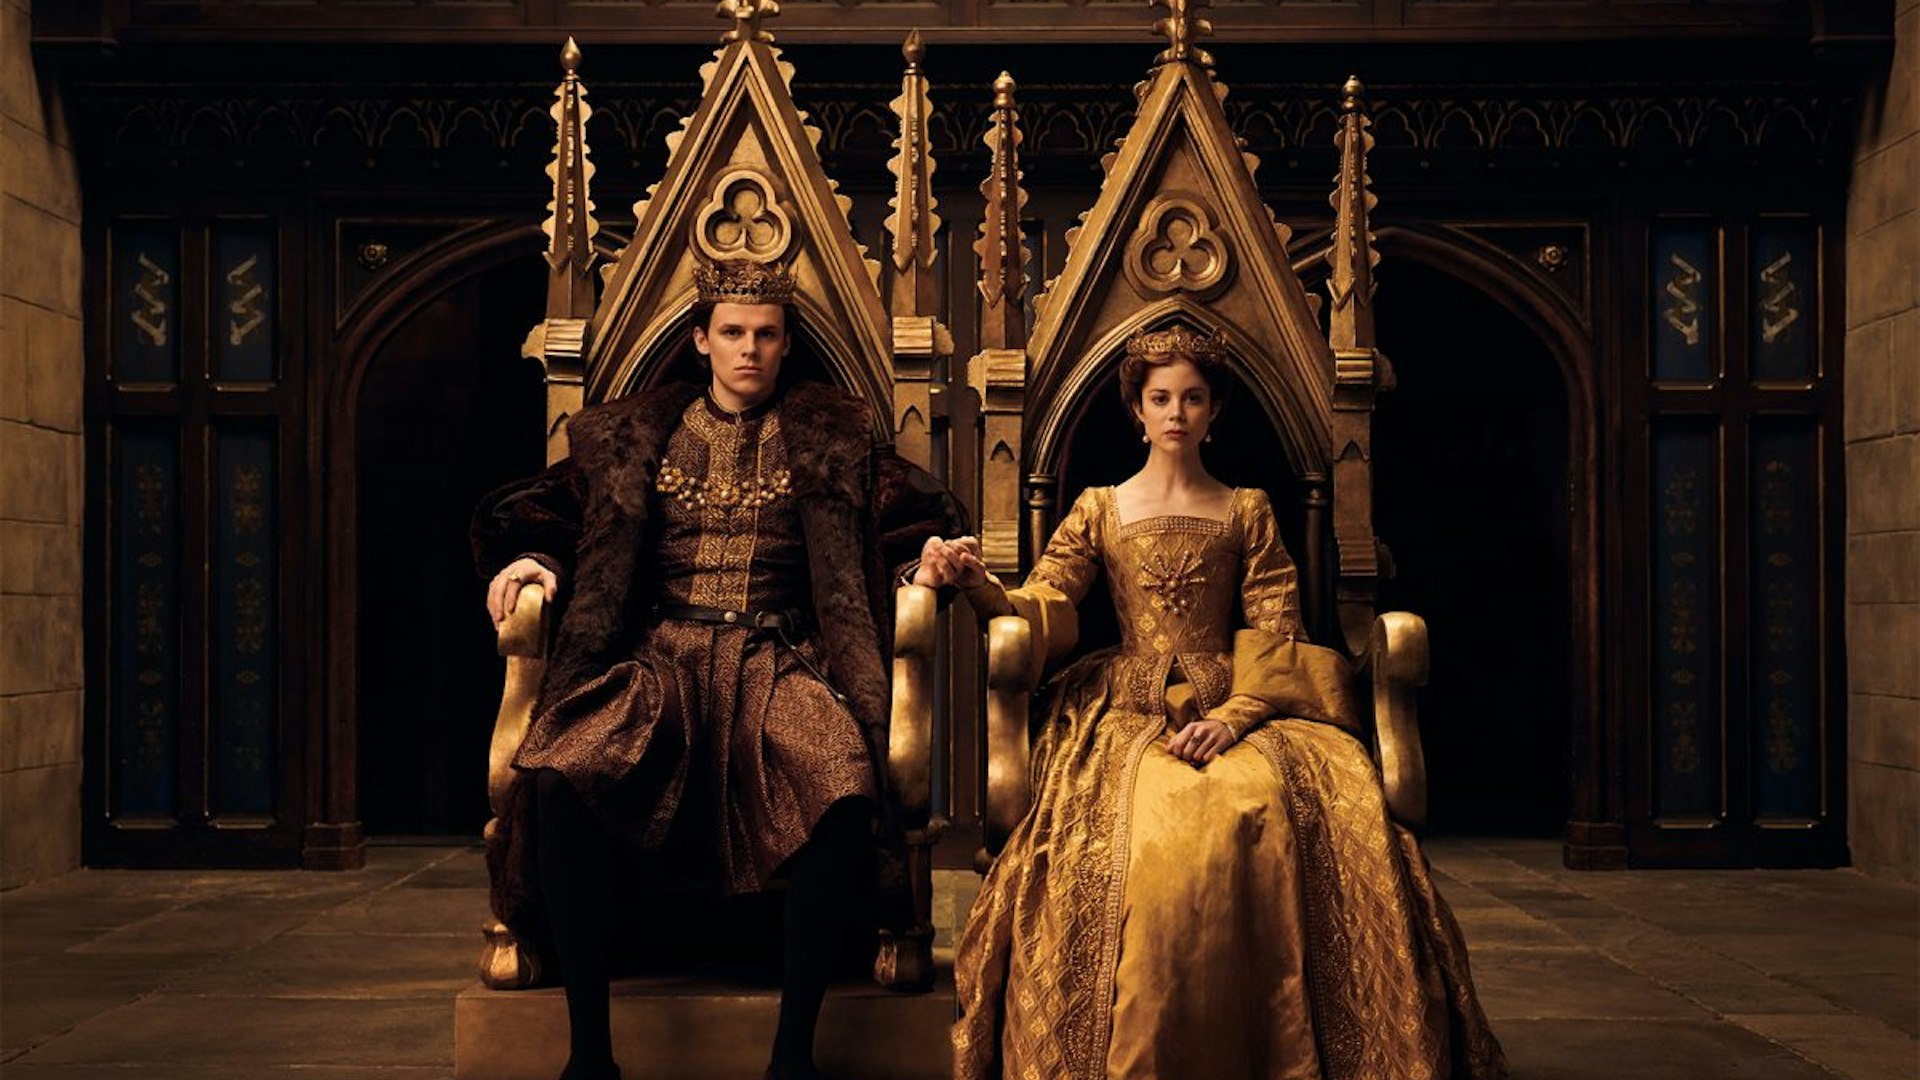 henry-and-cathering-on-thrones-the-spanish-princess-season-2-1200x800